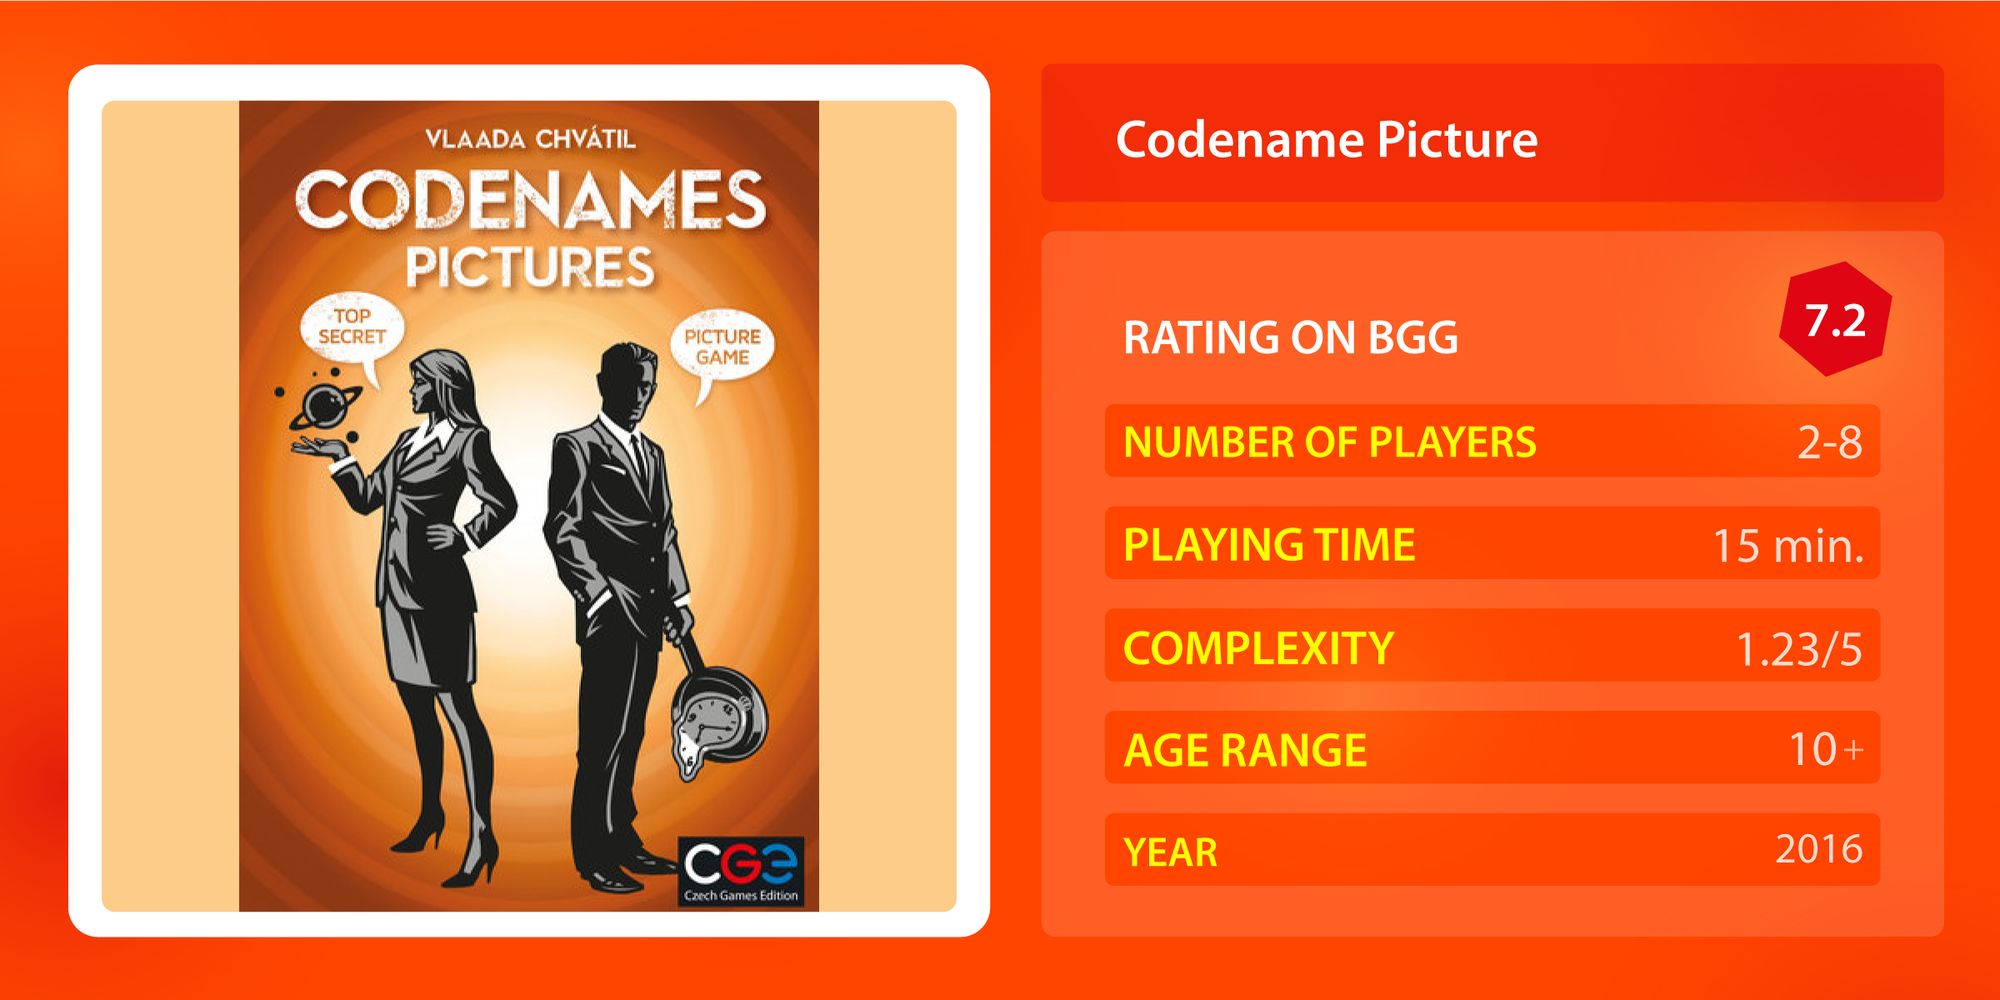 A Deep Dive into Codenames Pictures